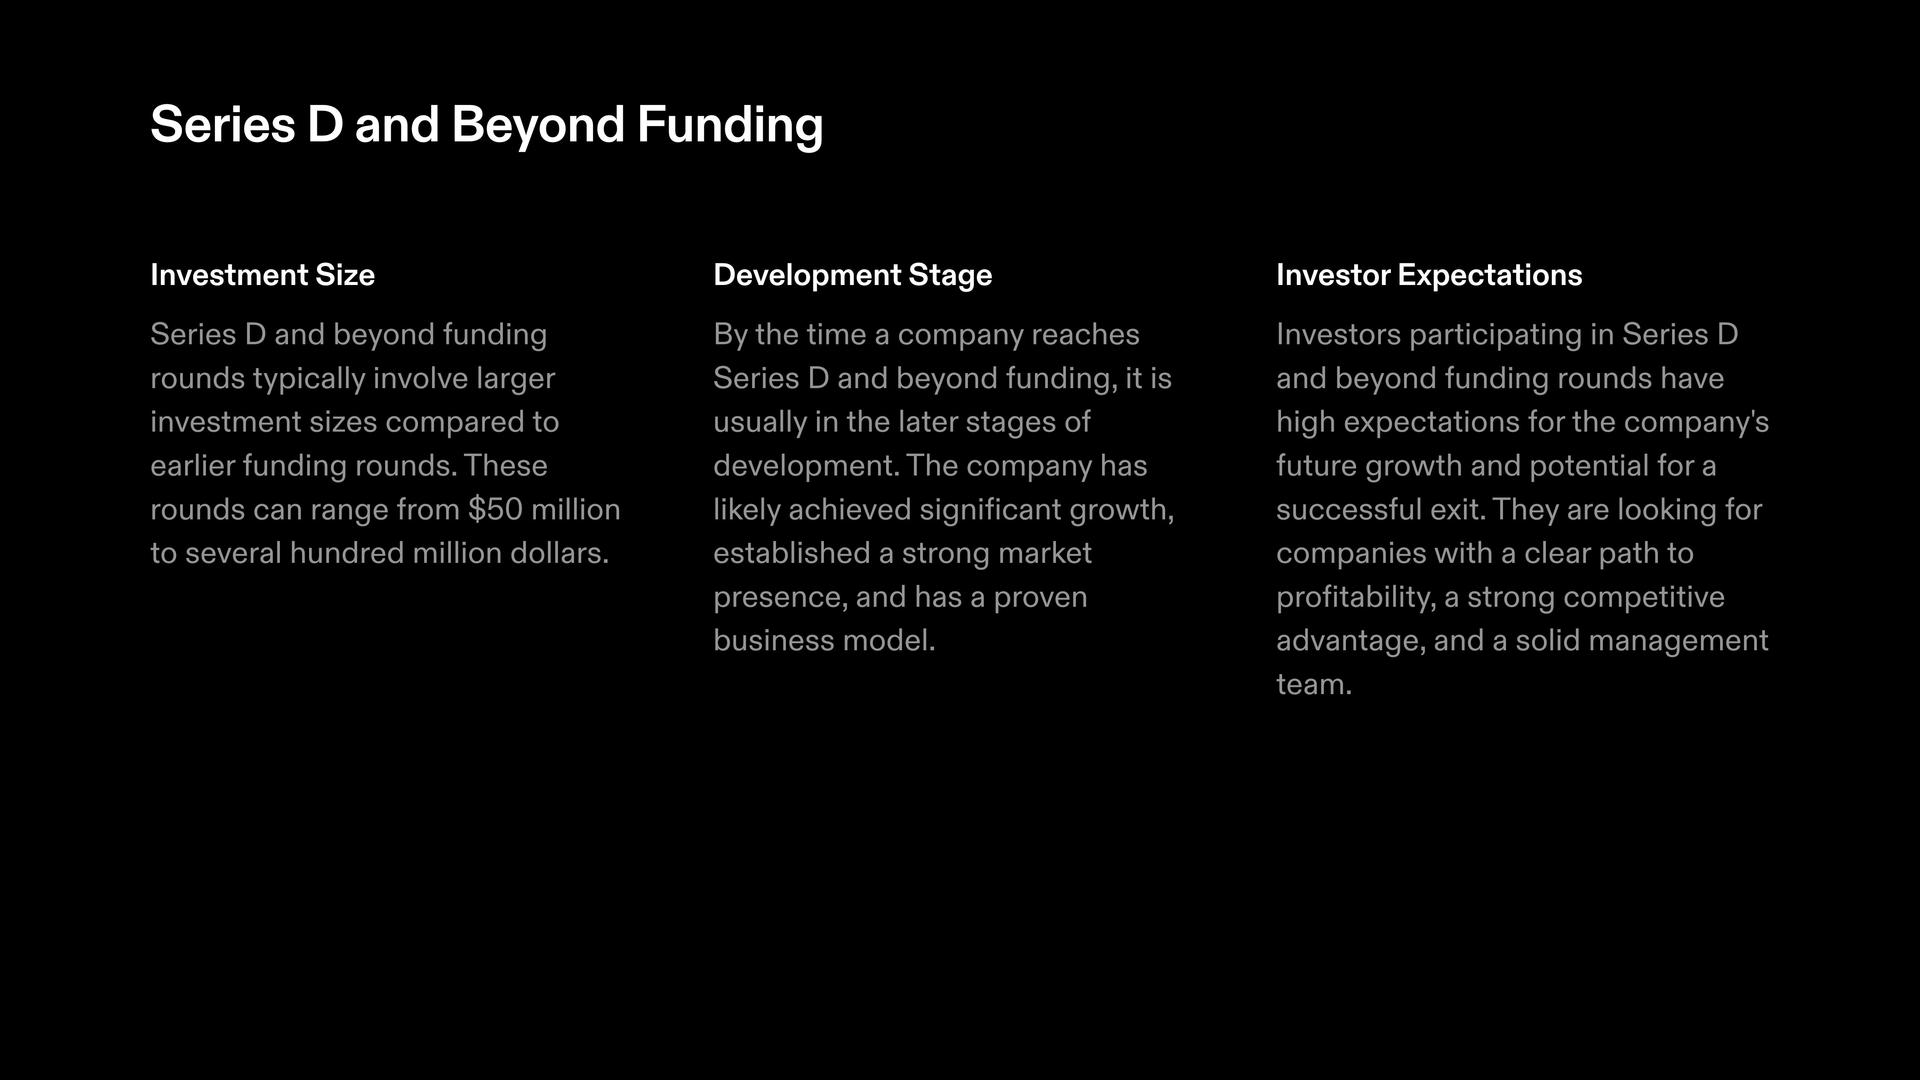 Series D Startup Funding: Investment size, development stage and investor expectations